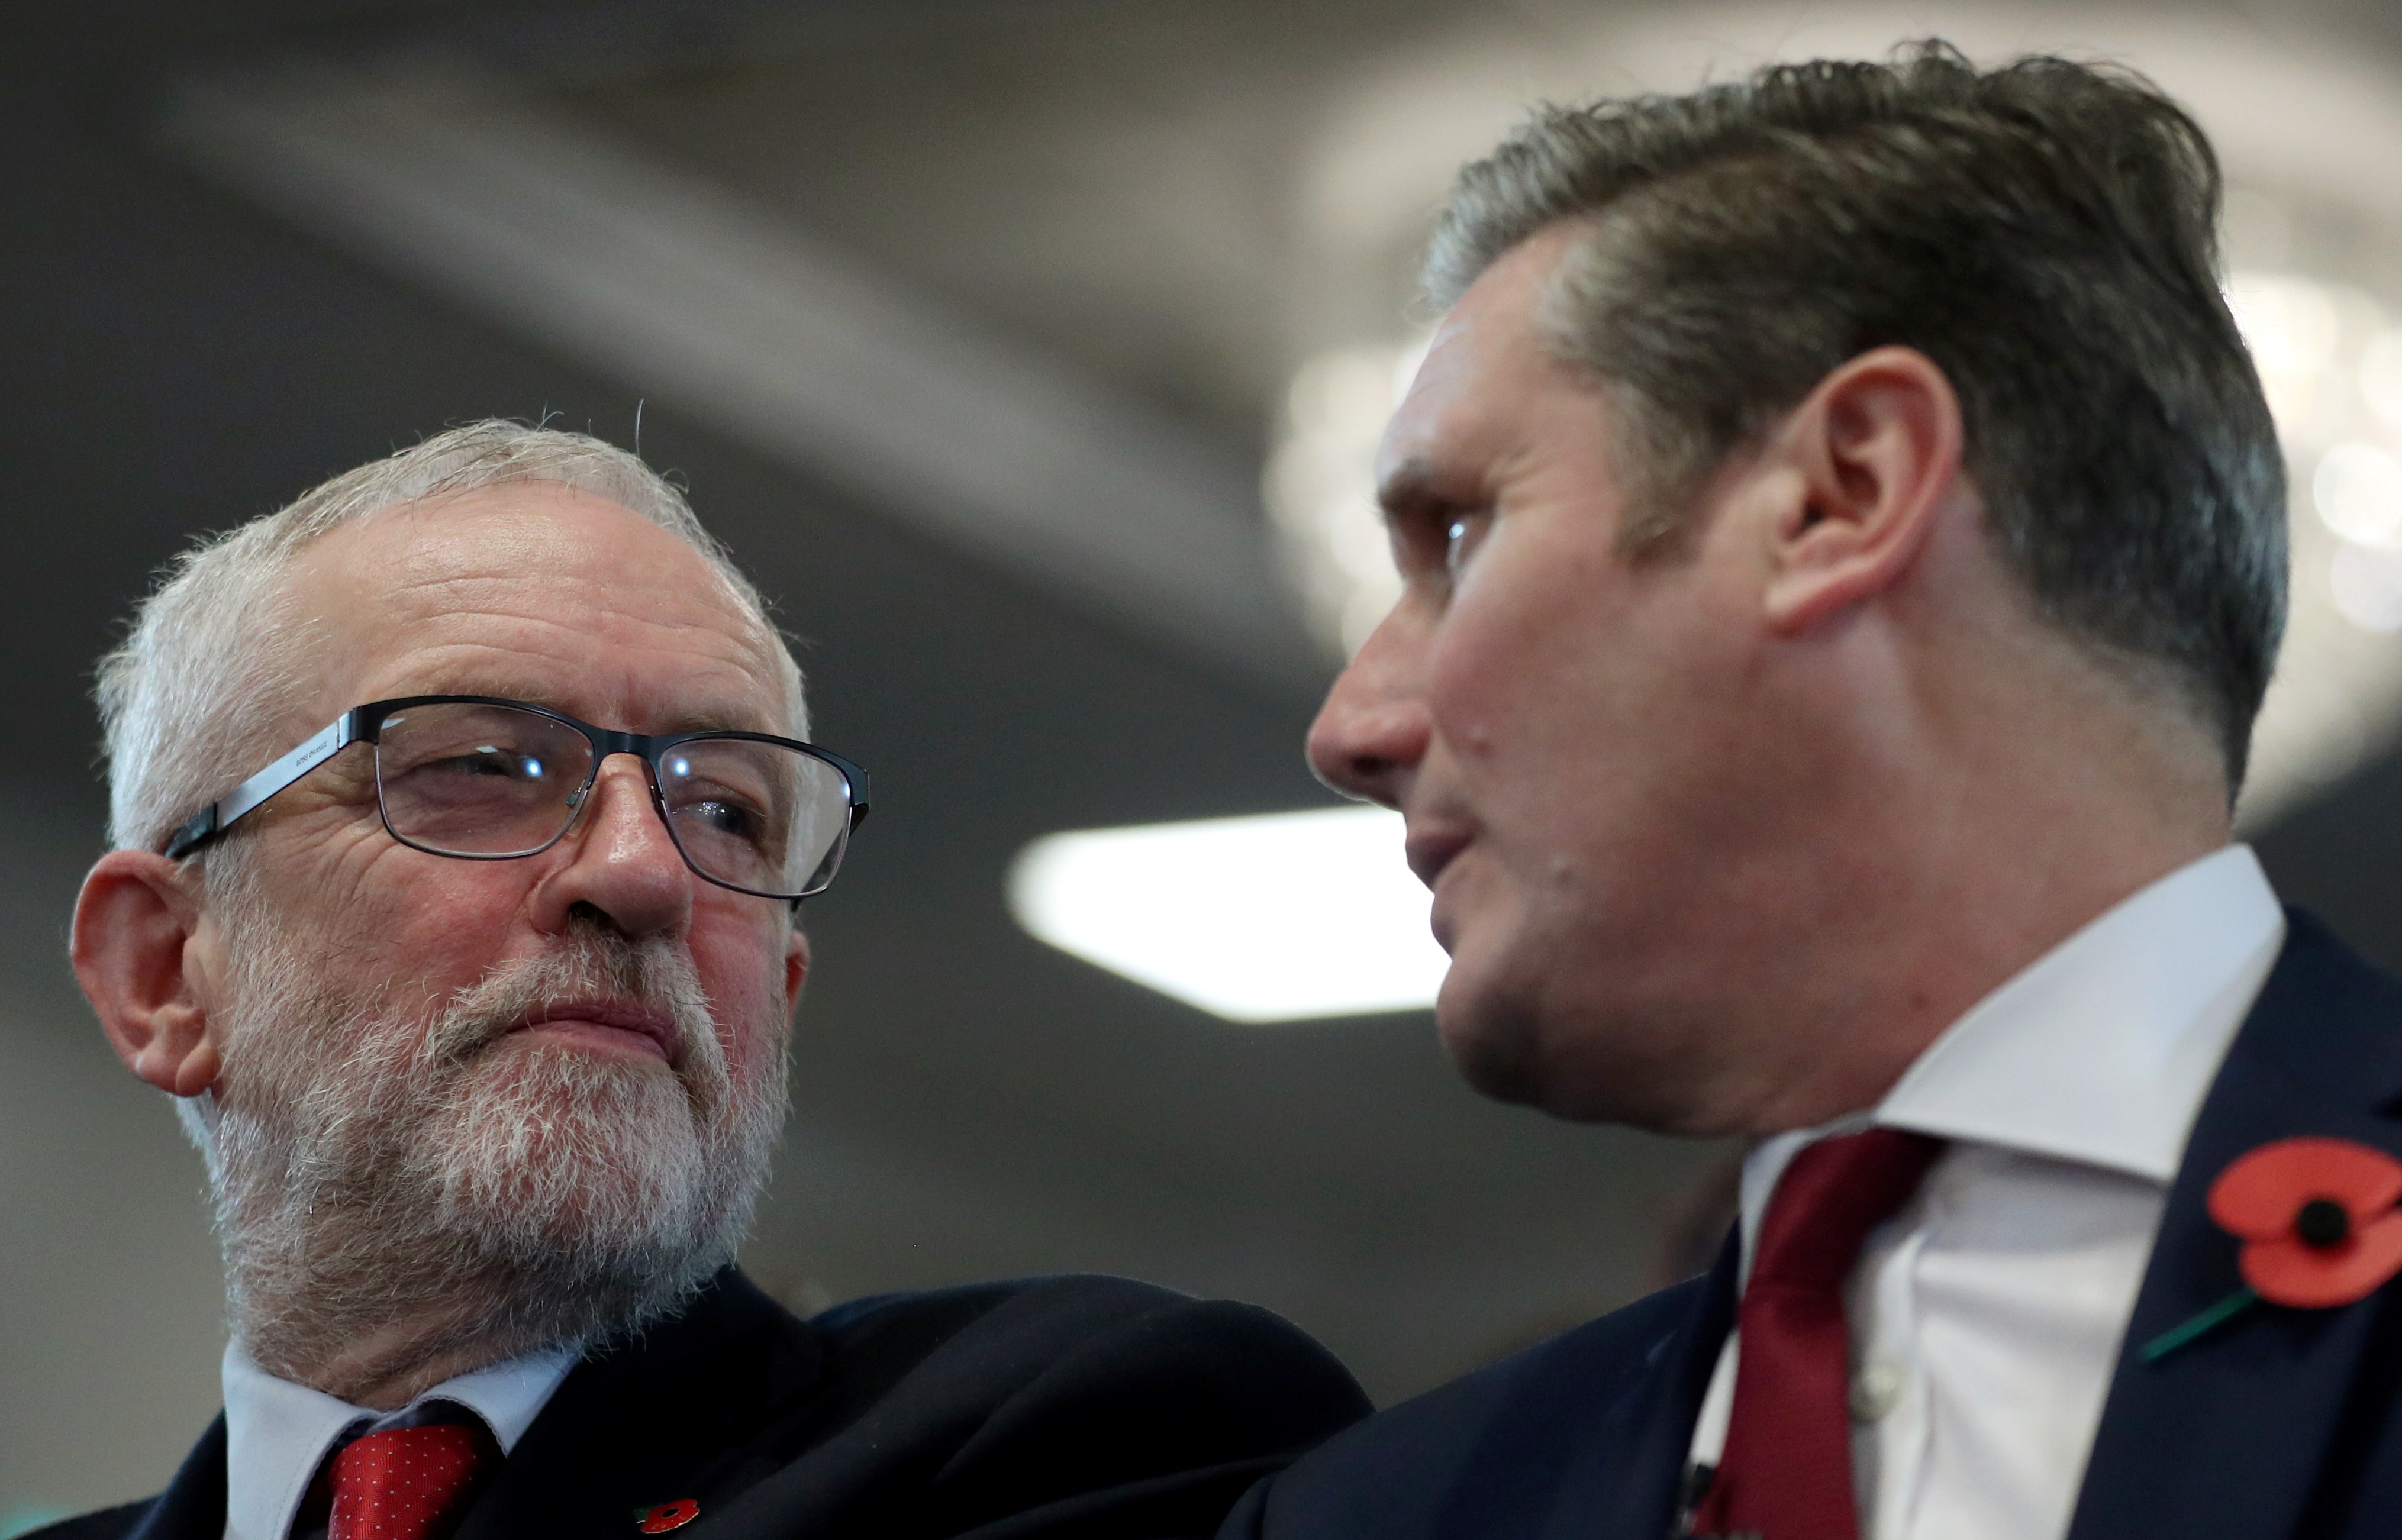 Former Labour leader Jeremy Corbyn and current leader Keir Starmer during a general election campaign meeting in Harlow, UK on 5 November 2019 (Reuters)